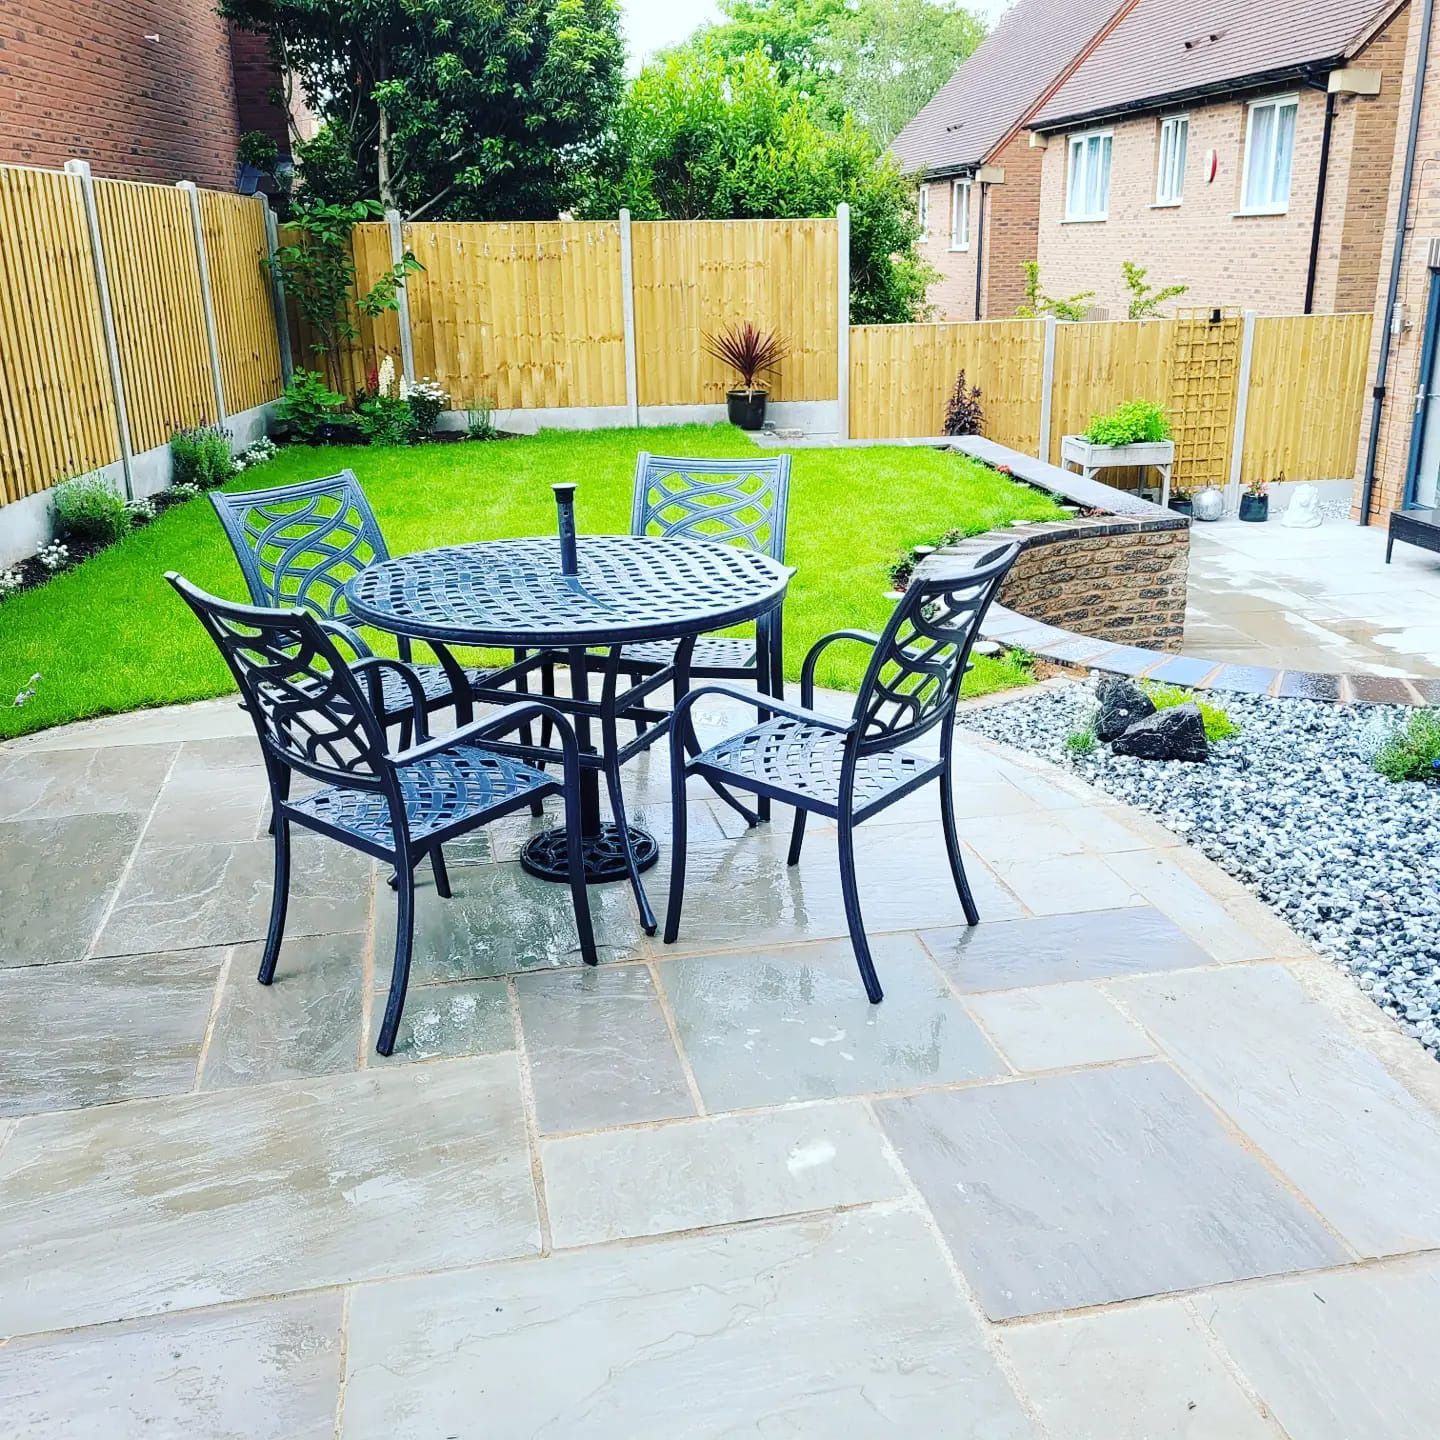 DNA Landscapes Cawston landscaping project